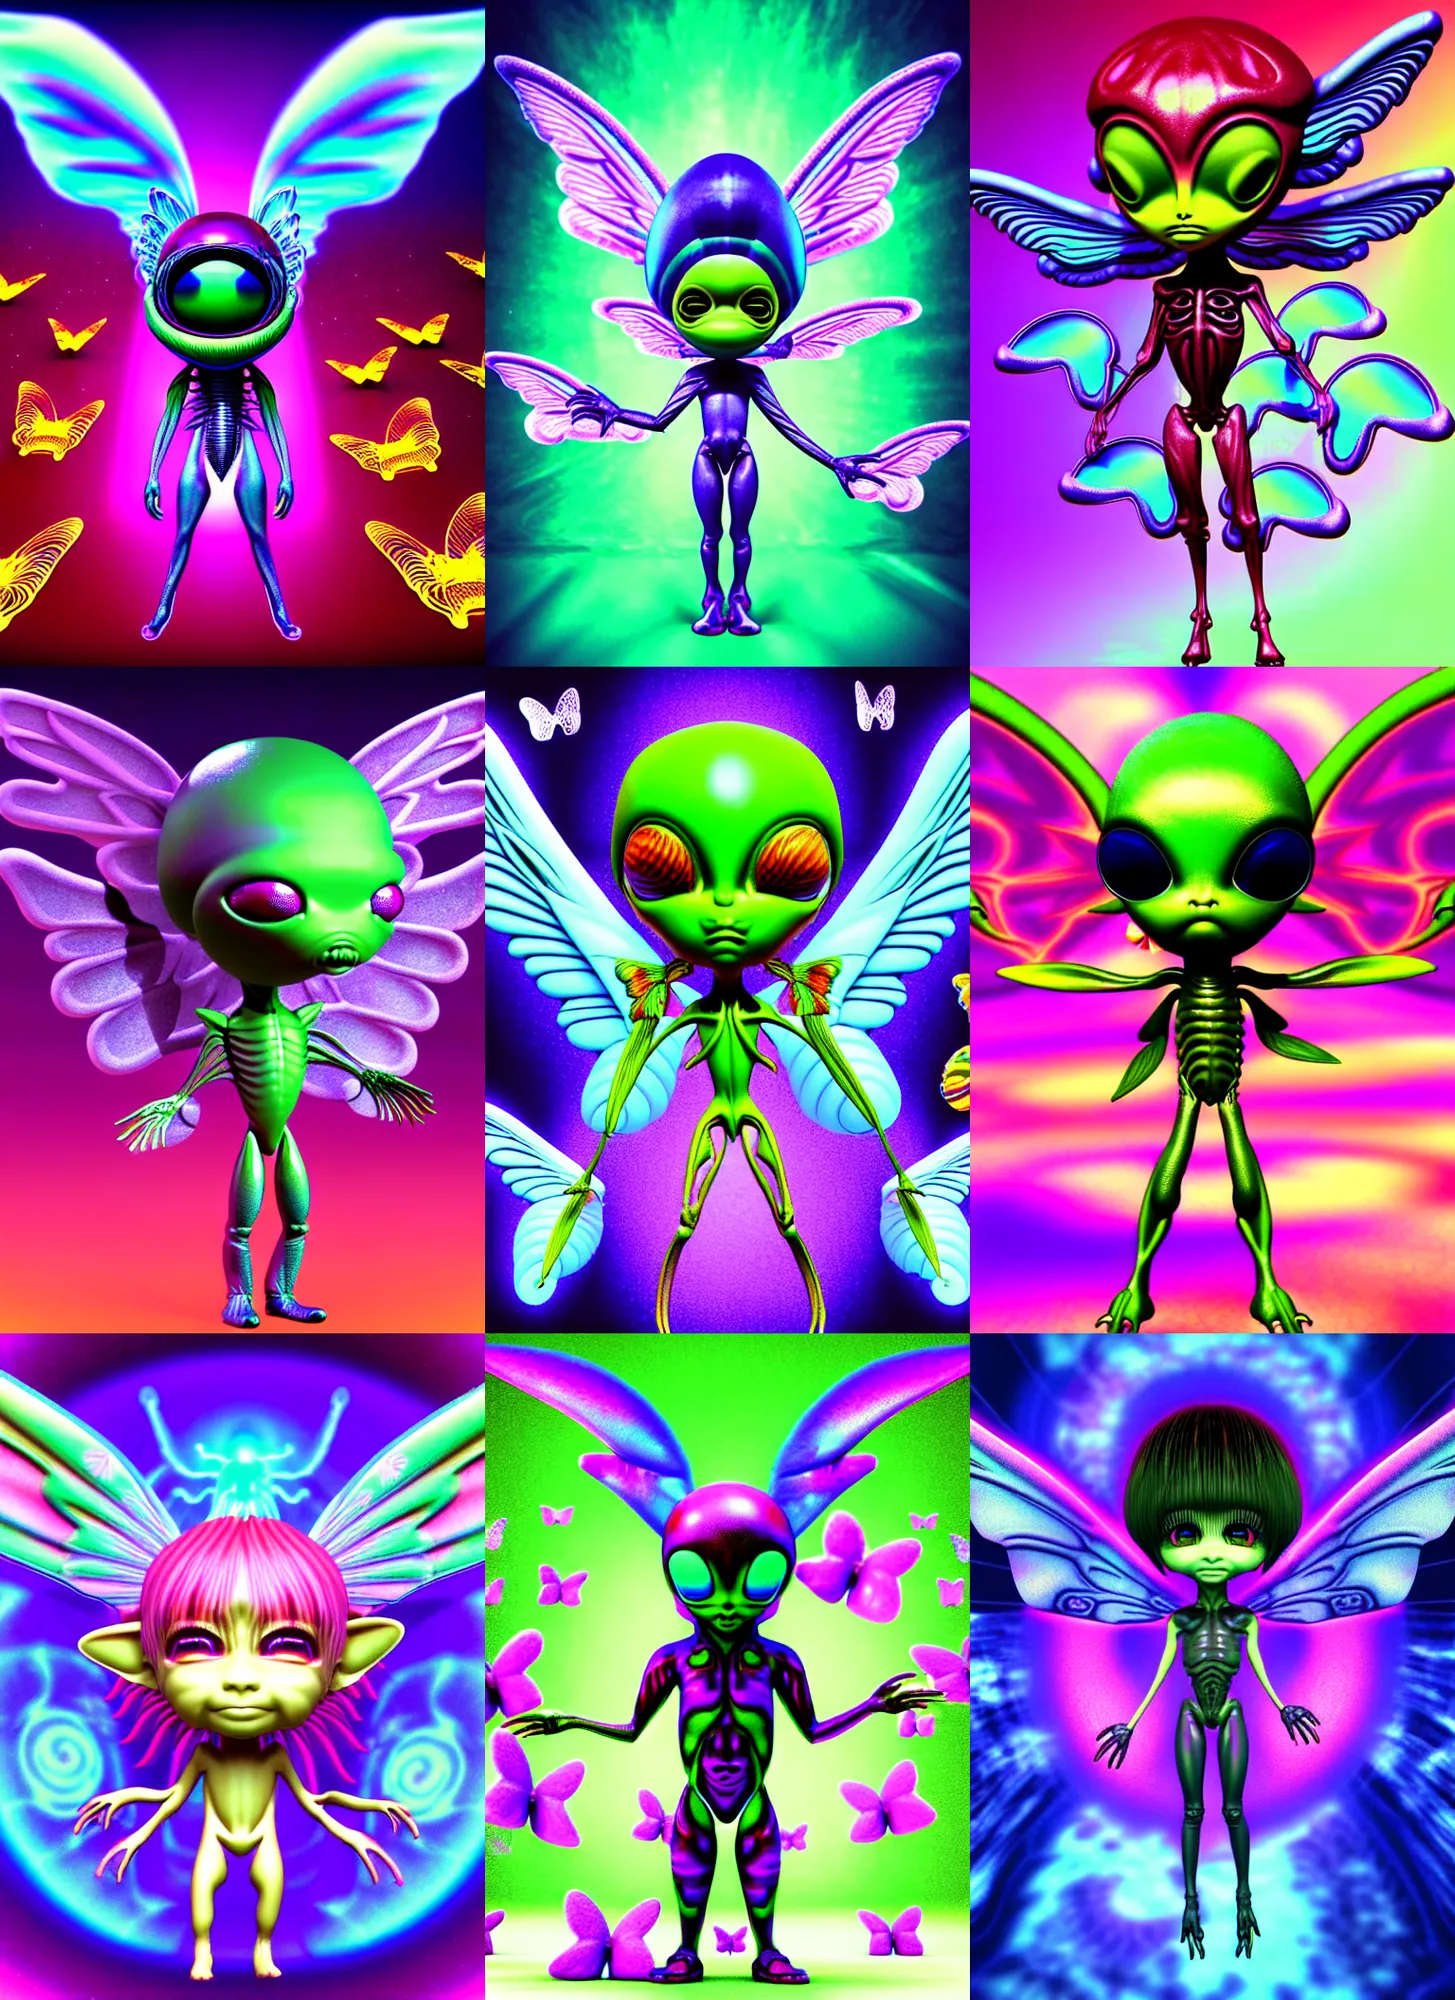 Prompt: 3d render of chibi alien by Ichiro Tanida 3D render wearing angel wings against a psychedelic swirly background with 3d butterflies and 3d flowers n the style of 1990's CG graphics 3d rendered y2K aesthetic by Ichiro Tanida, 3DO magazine